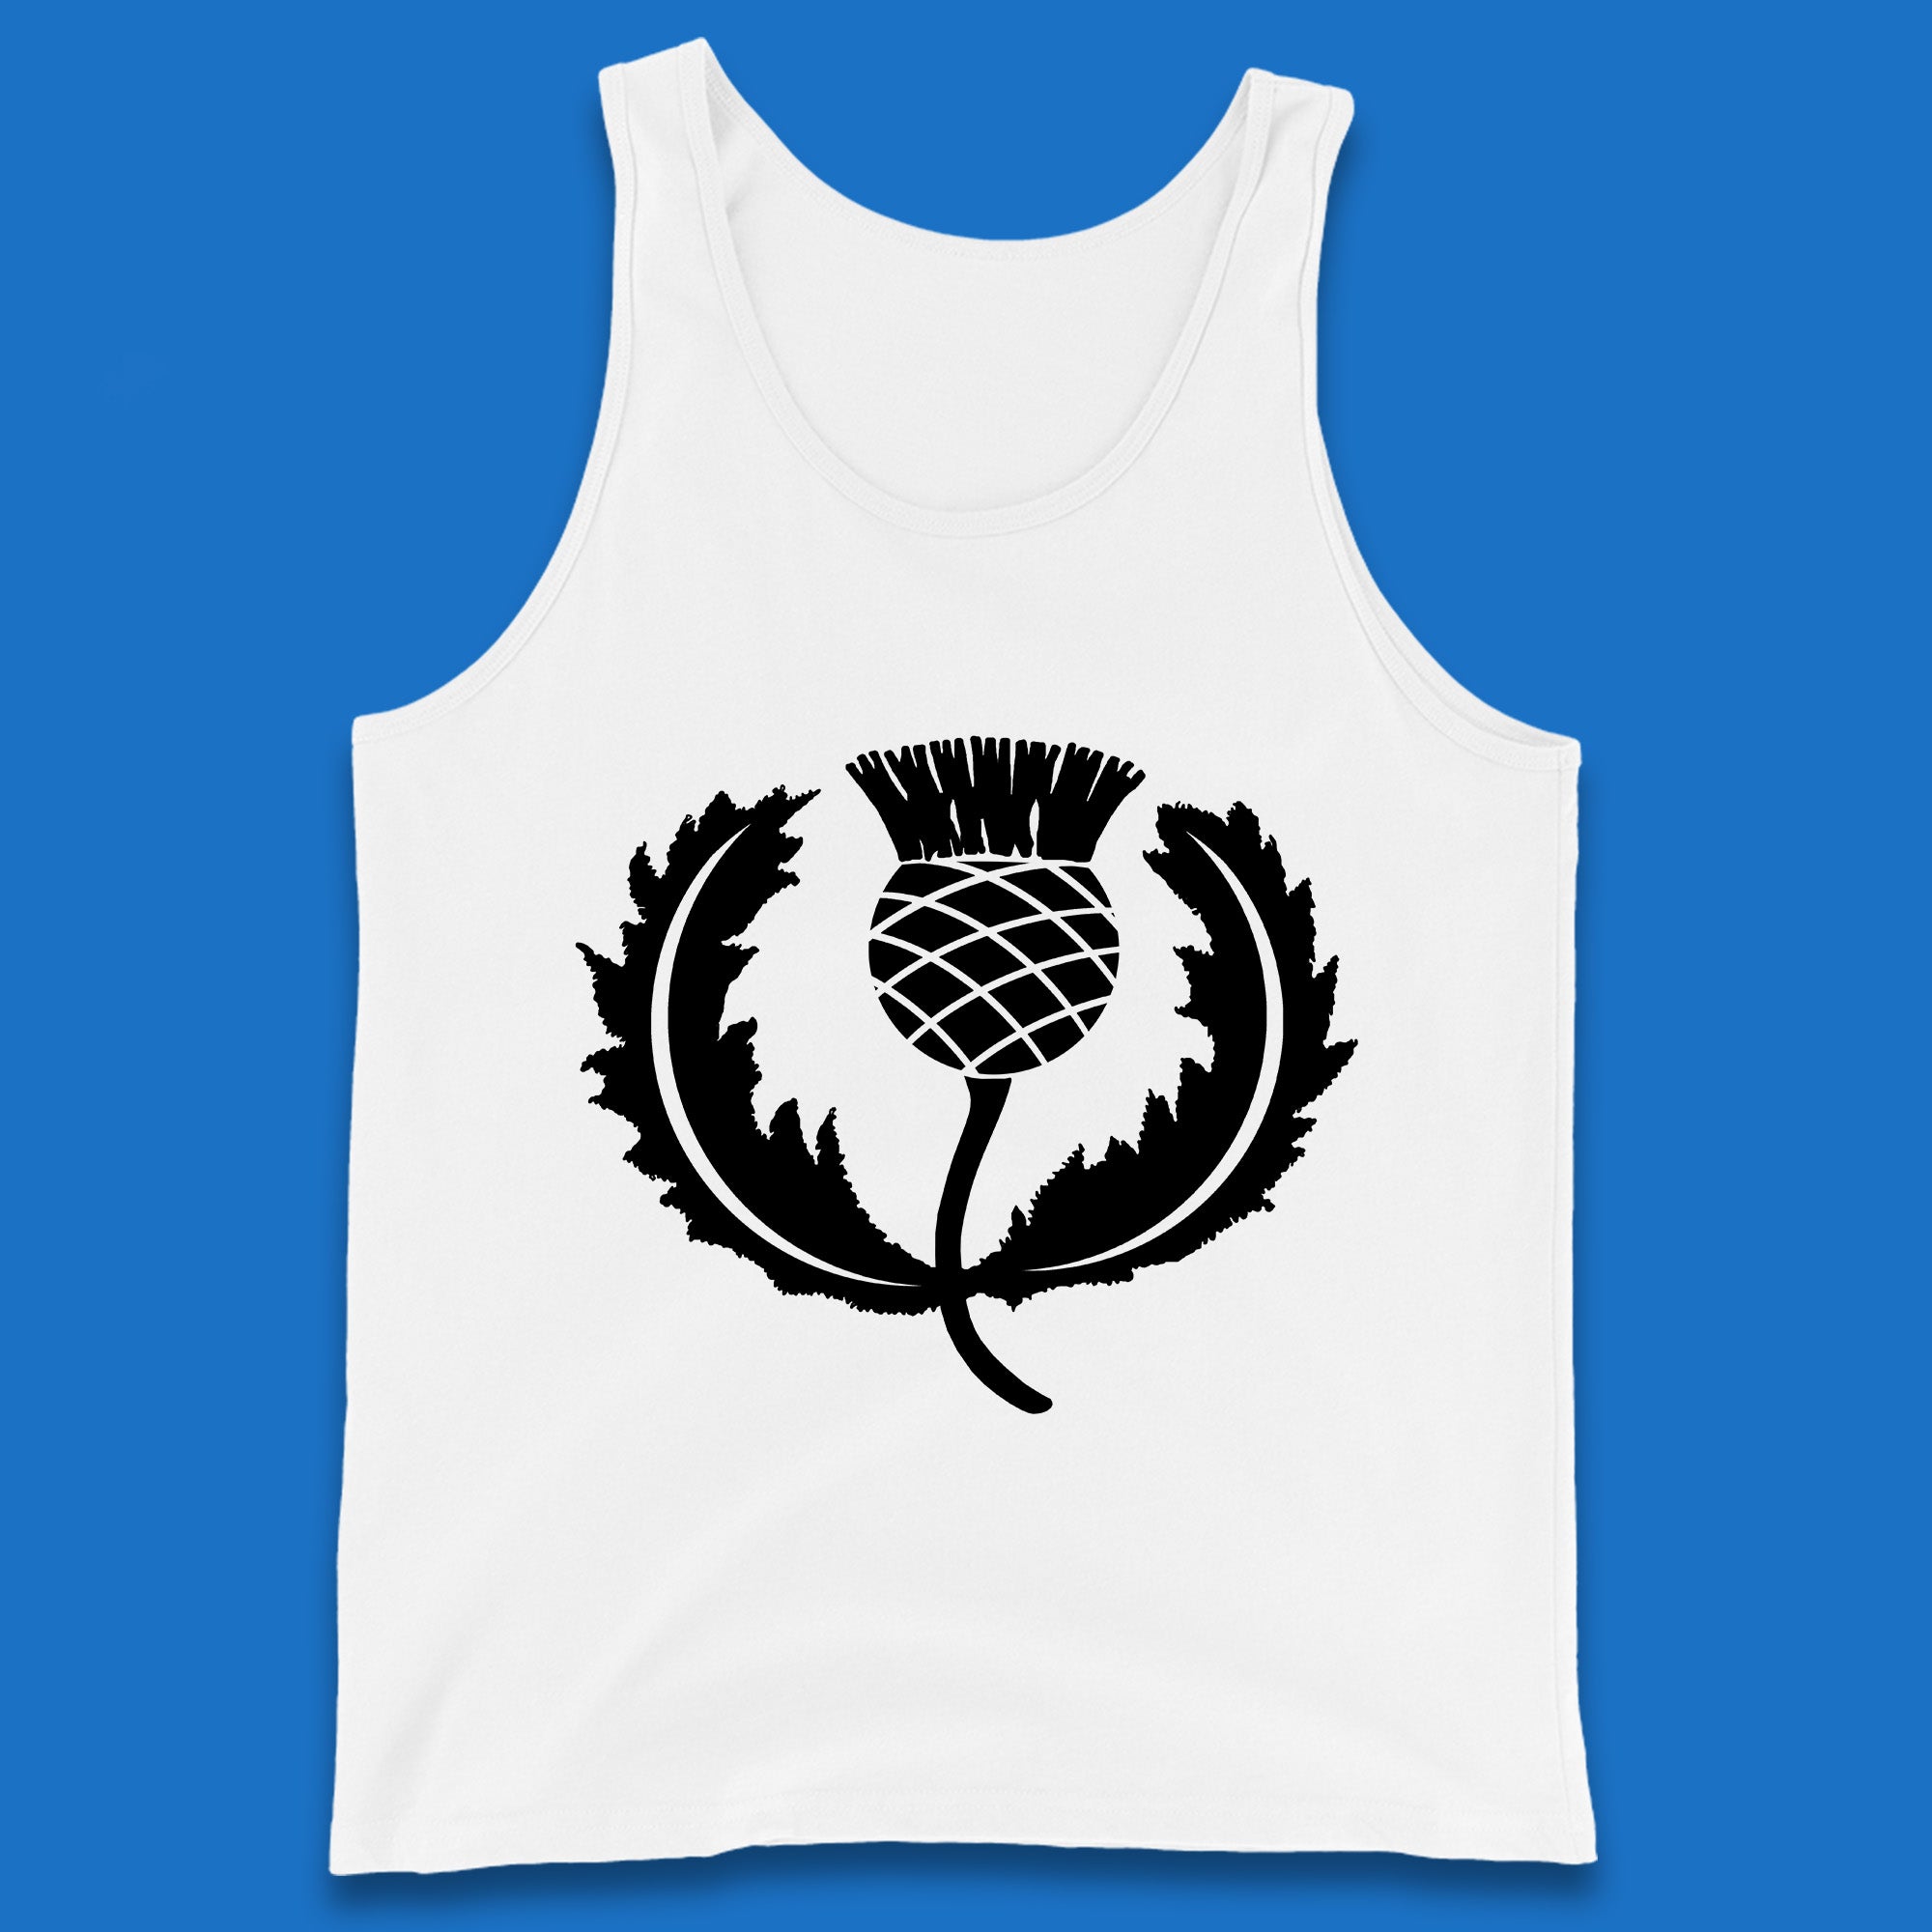 Vintage Scotland Rugby Retro Style Scotland National Rugby Union Team Scottish Rugby Union Tank Top